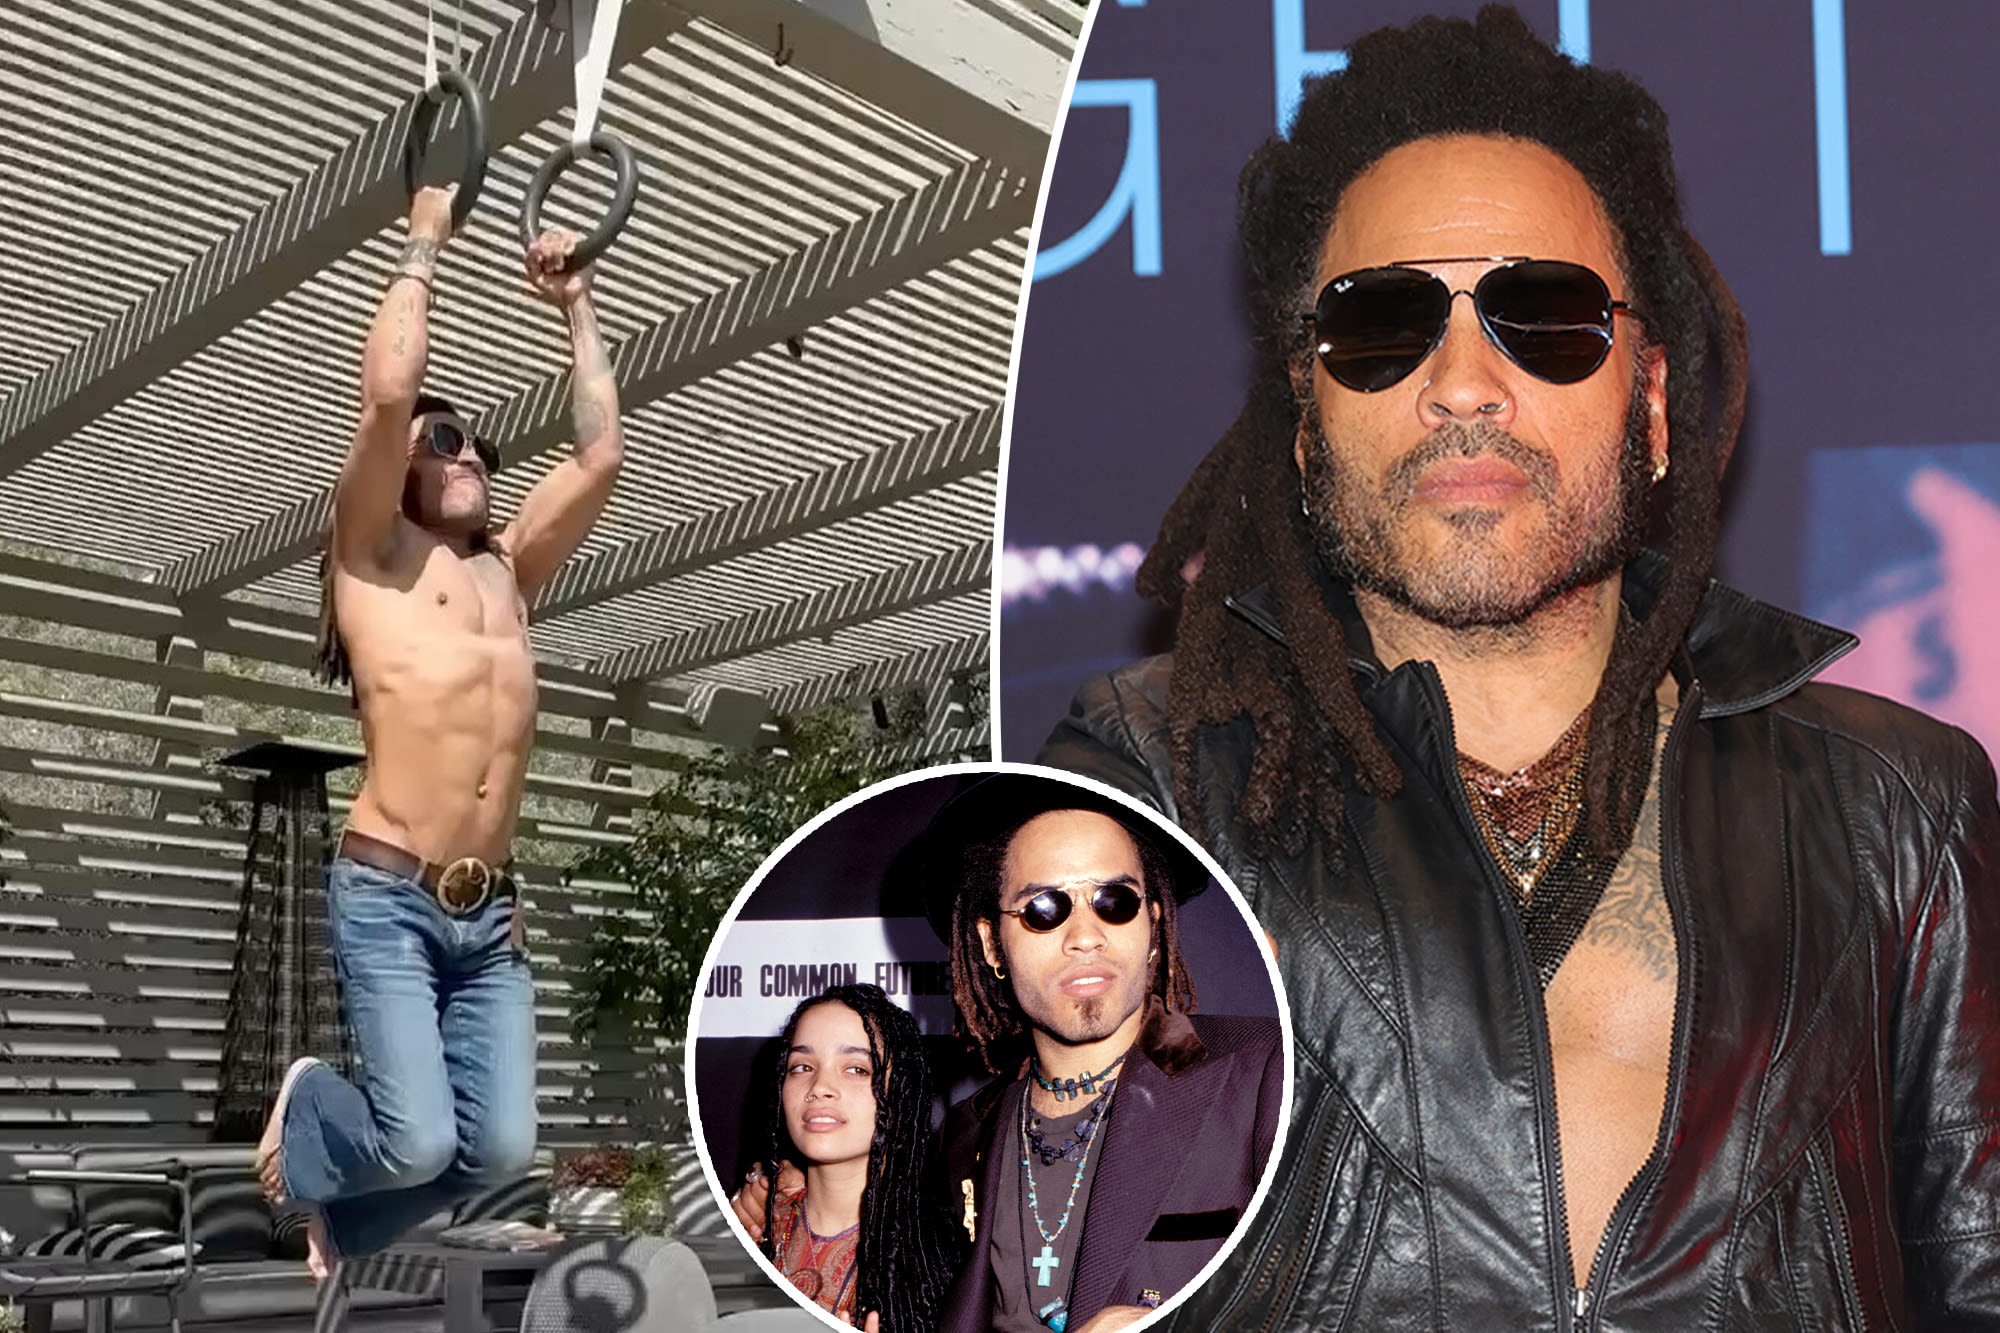 Lenny Kravitz makes a stunning confession about his sex life: ‘The way I live’